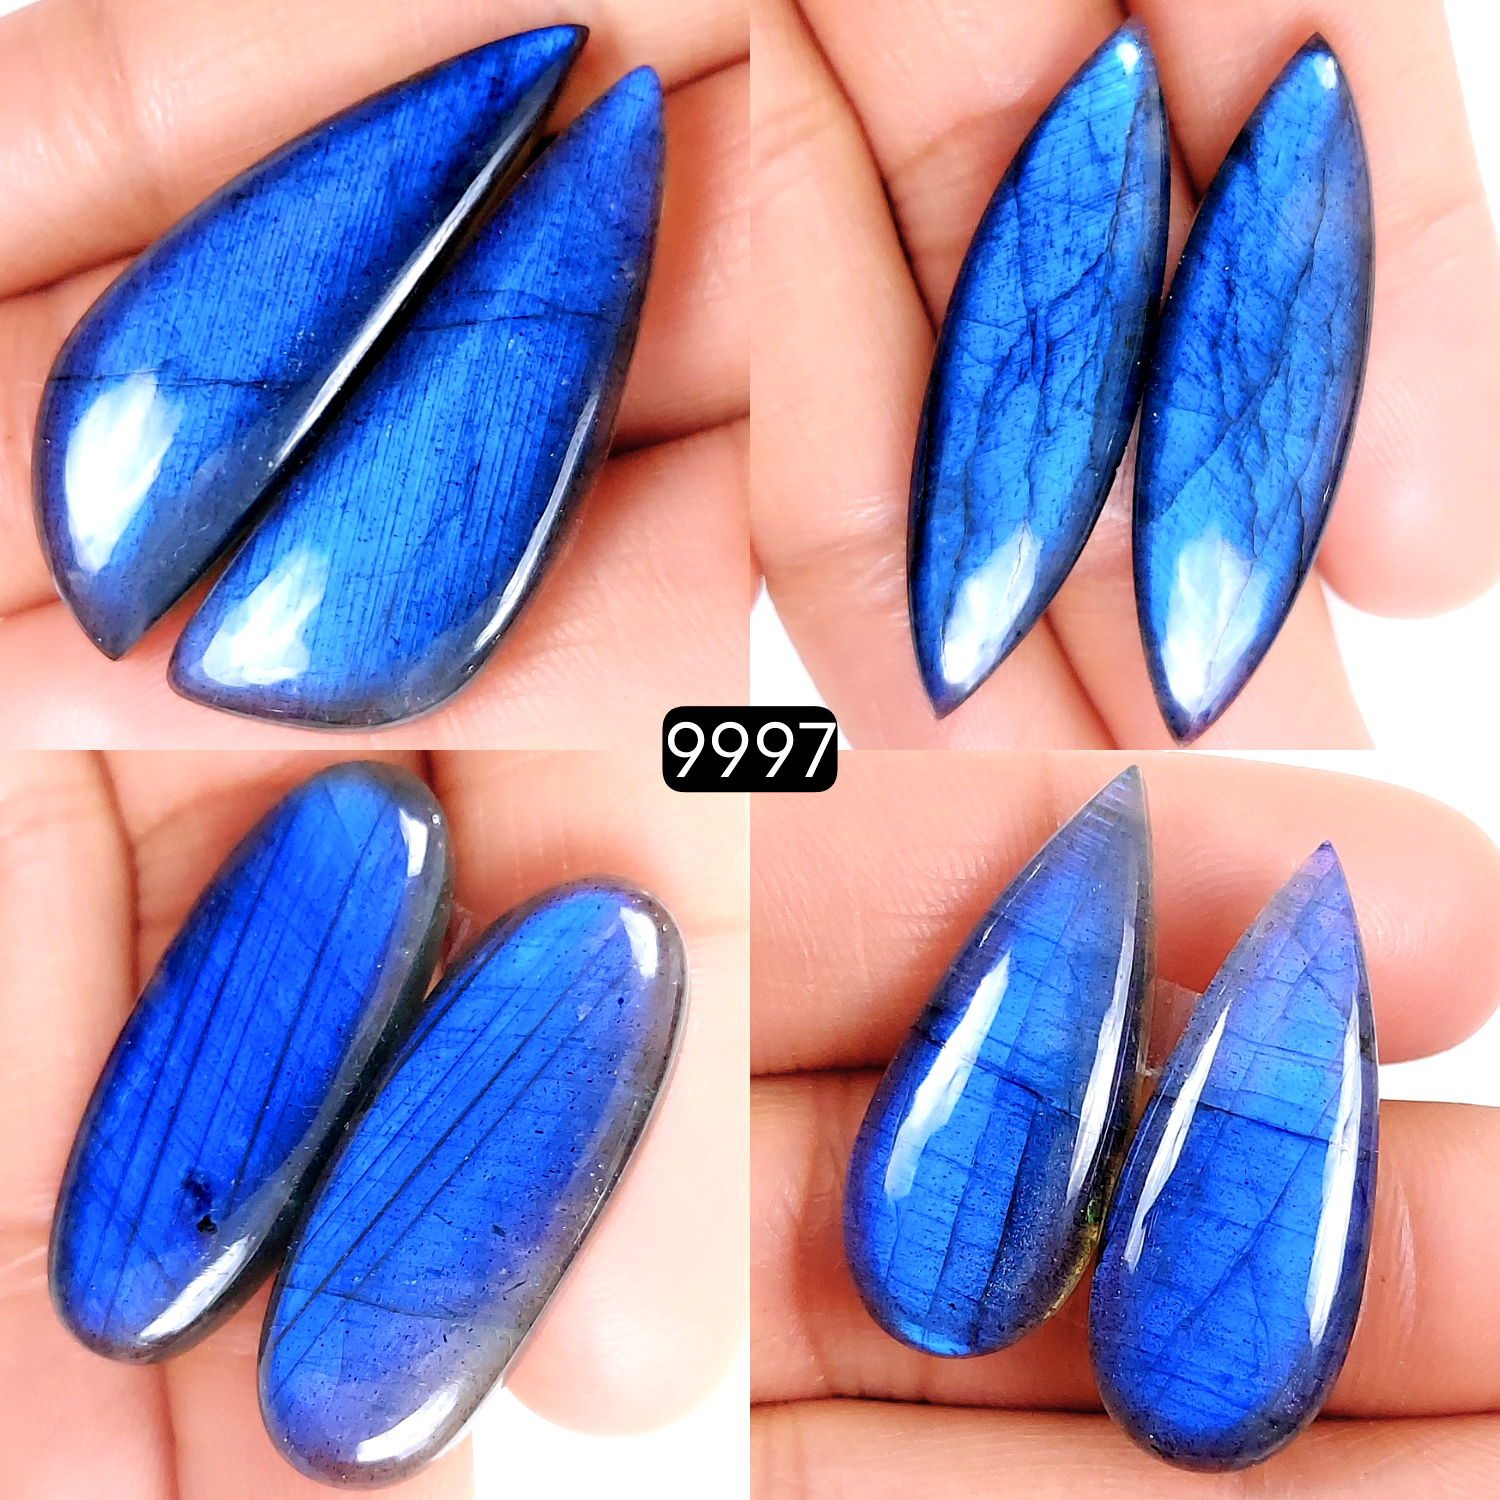 4Pair 187Cts Natural Labradorite Blue Fire Briolette Dangle Drop Earrings Semi Precious Crystal For Hoop Earrings Blue Gemstone Cabochon Matching pair 42x10 32x14mm #9997